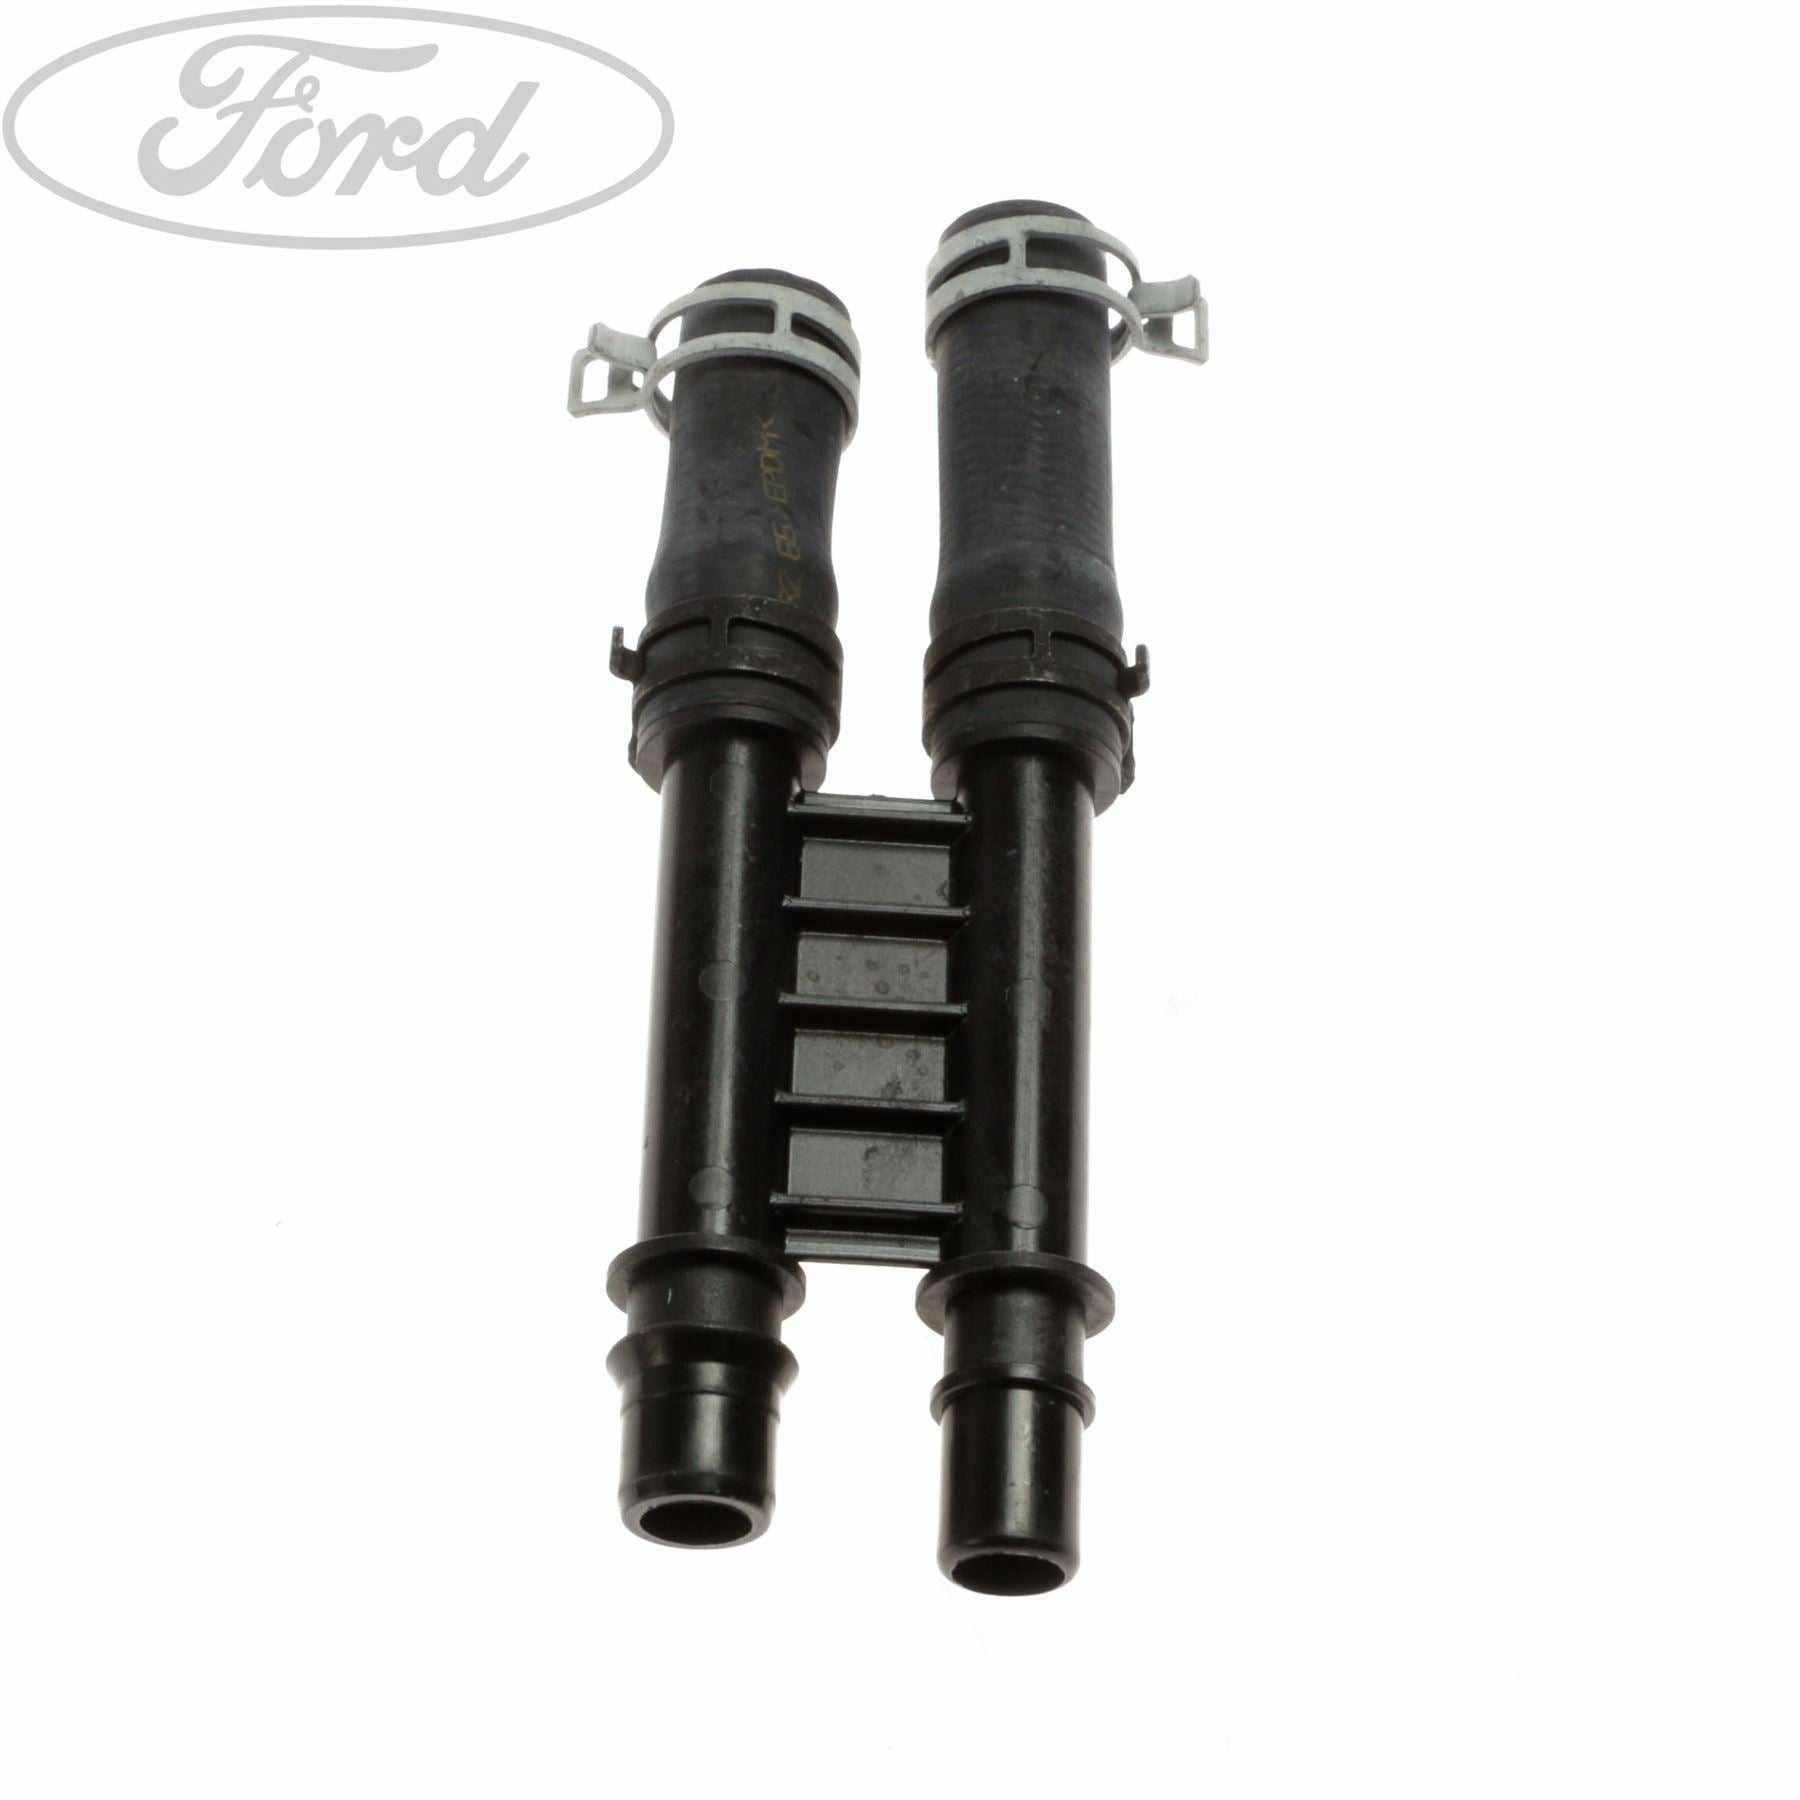 Ford, TRANSIT CUSTOM 2.0 ECOBLUE AUX HEATER OUTLET HOSE